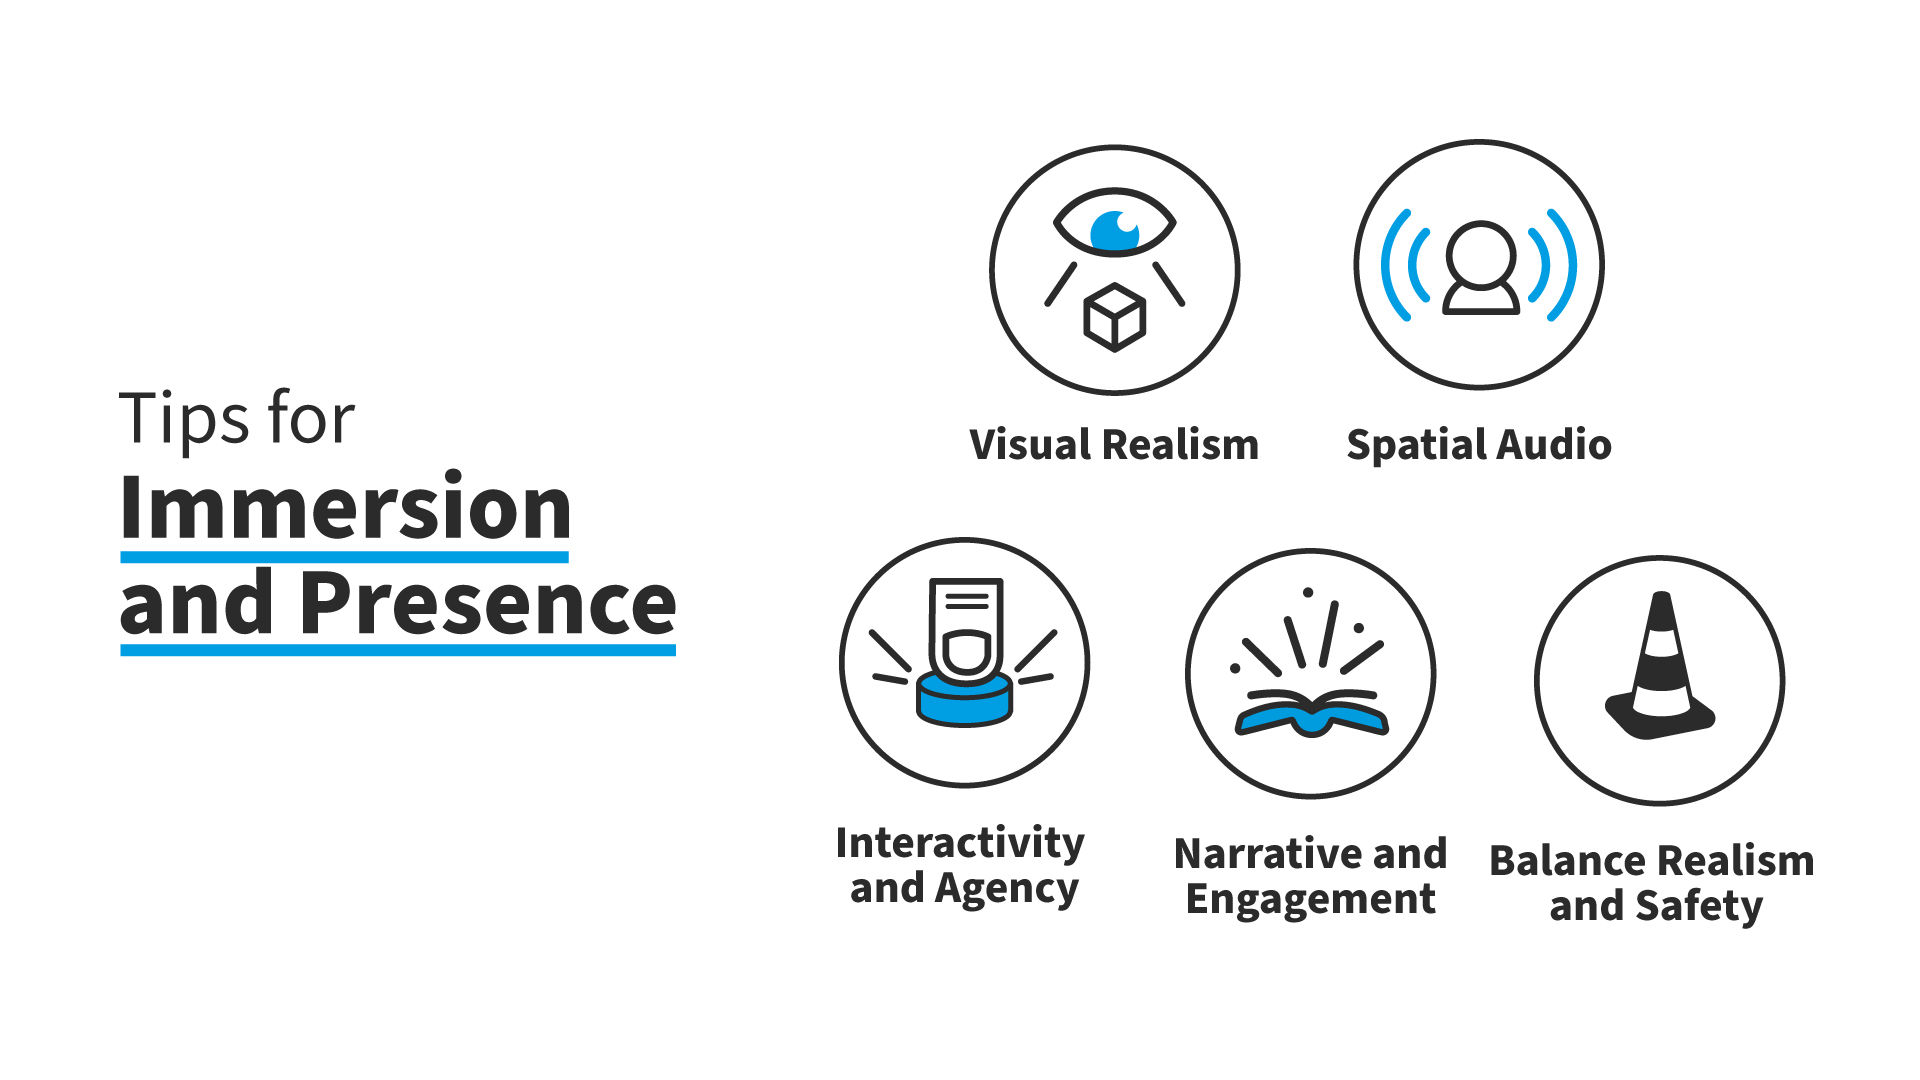 An illustration with five different icons, each representing a different tip for designing for immersion and presence. They include visual realist, spatial audio, interactivity and agency, narrative and engagement, and balance realism and safety.